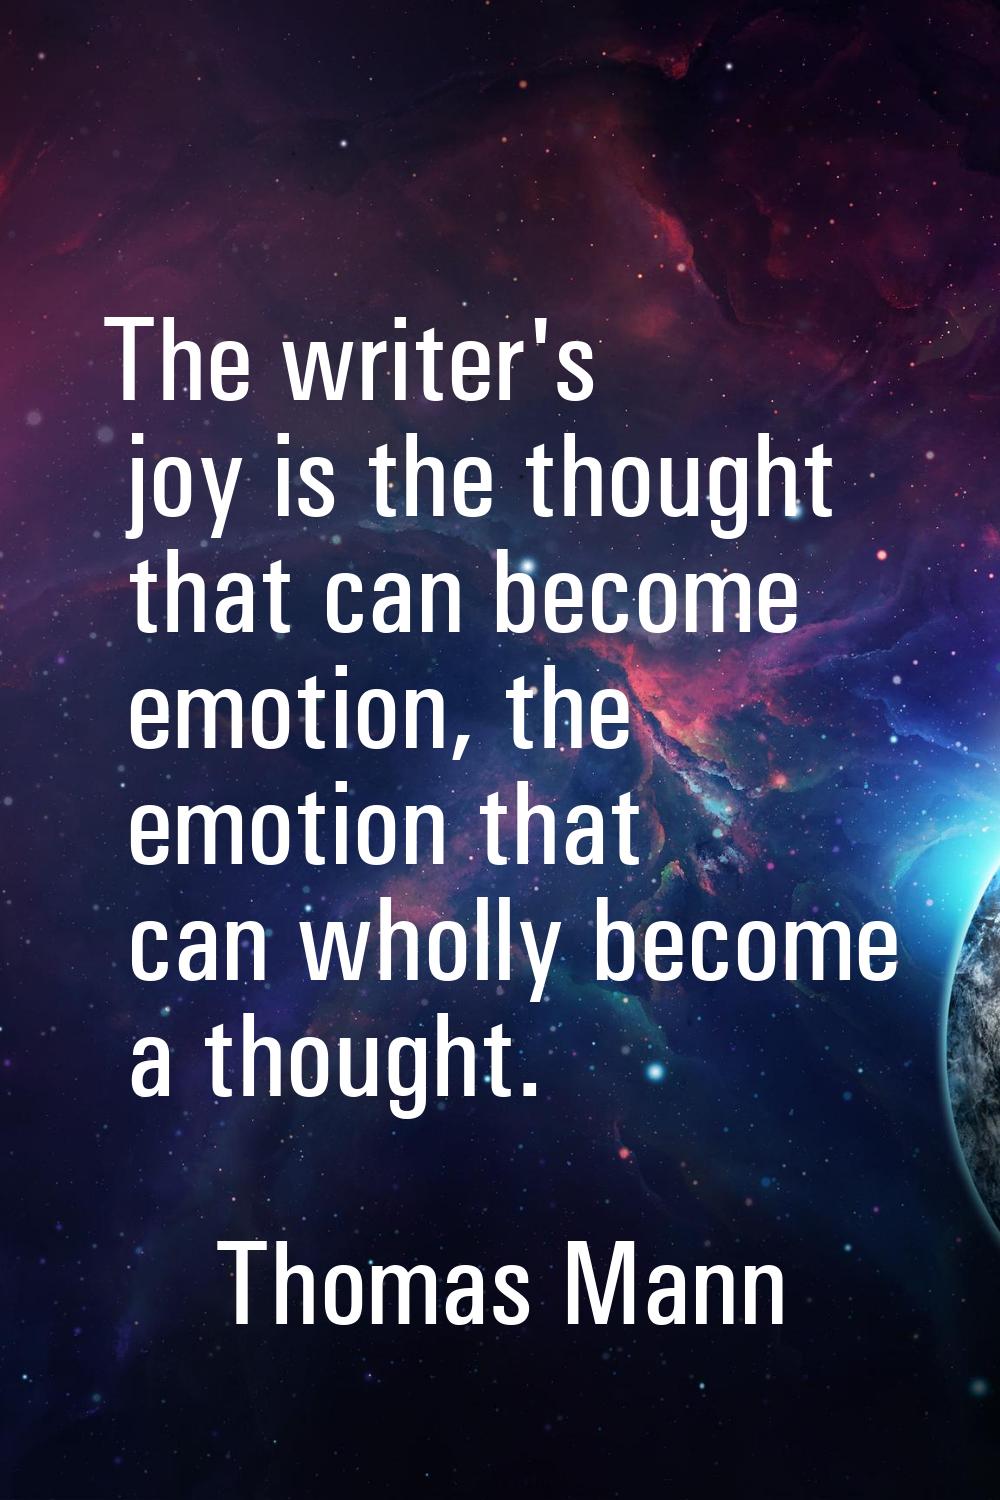 The writer's joy is the thought that can become emotion, the emotion that can wholly become a thoug